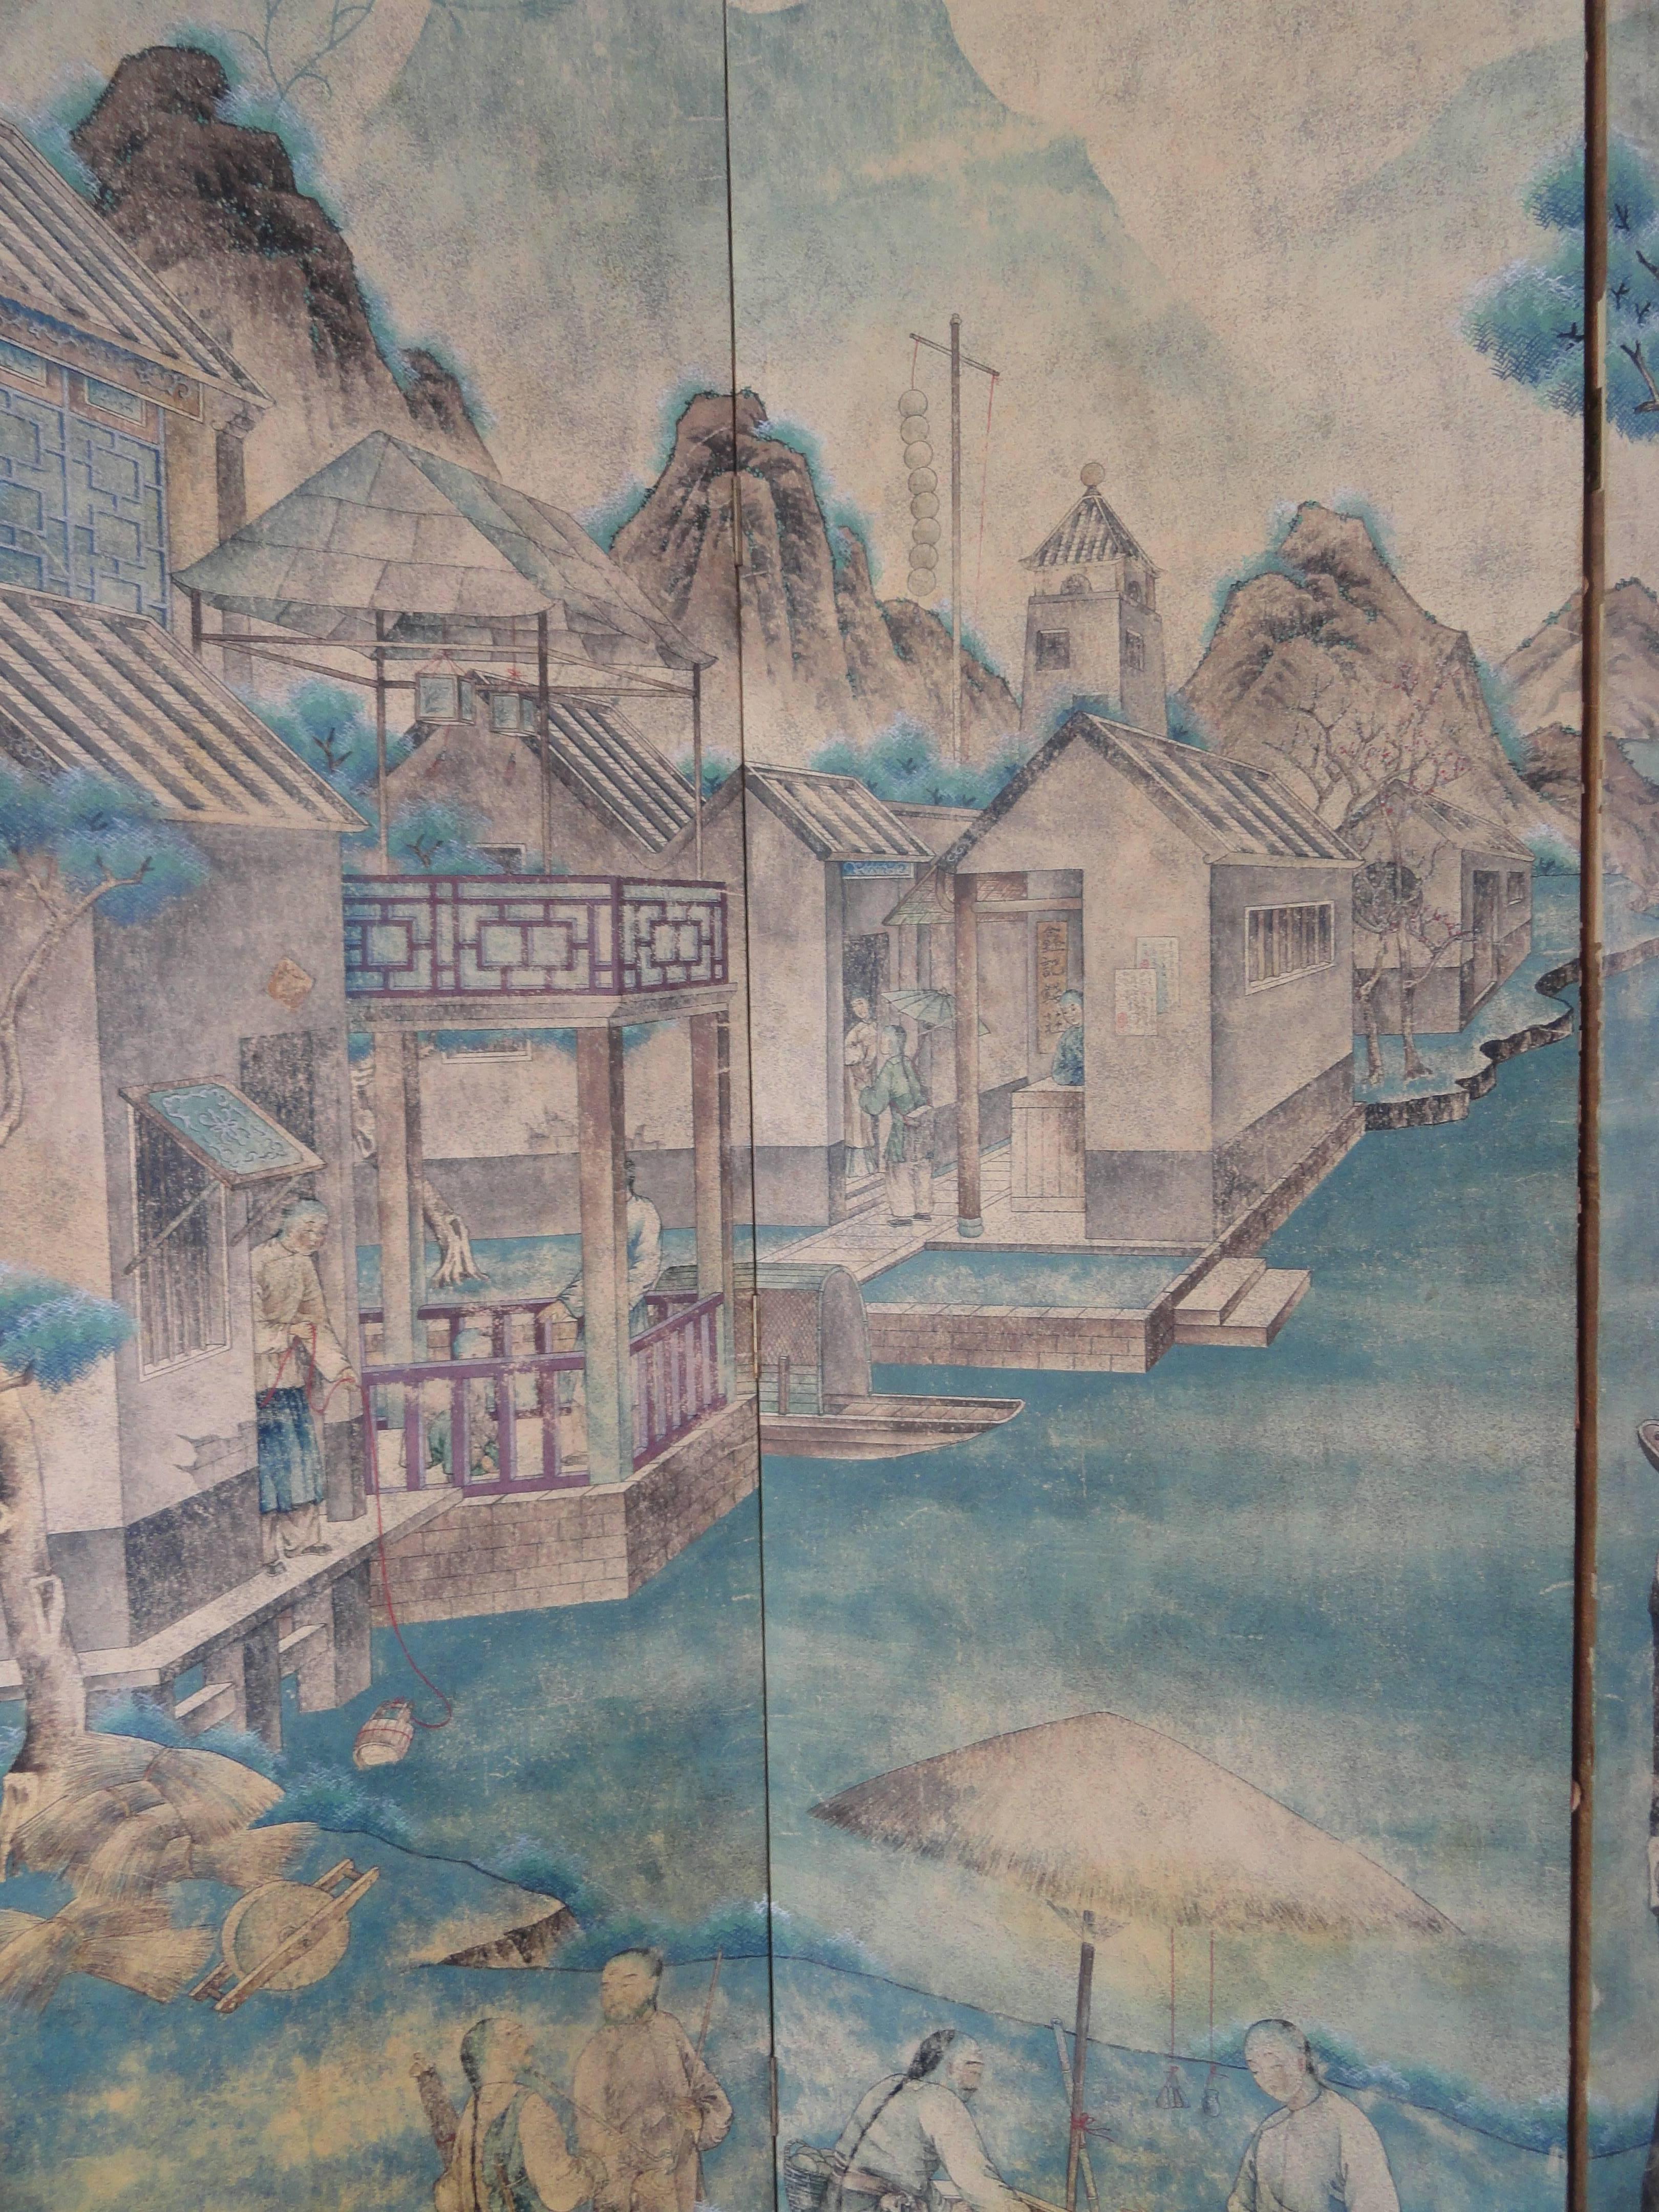 Late 18th to early 19th century Chinese six-panel screen with painted scenes of a mystical village with homes and temples and markets. Framed in wood. Fronting lovely waterways and canals. Plain paper back. See detail pic.